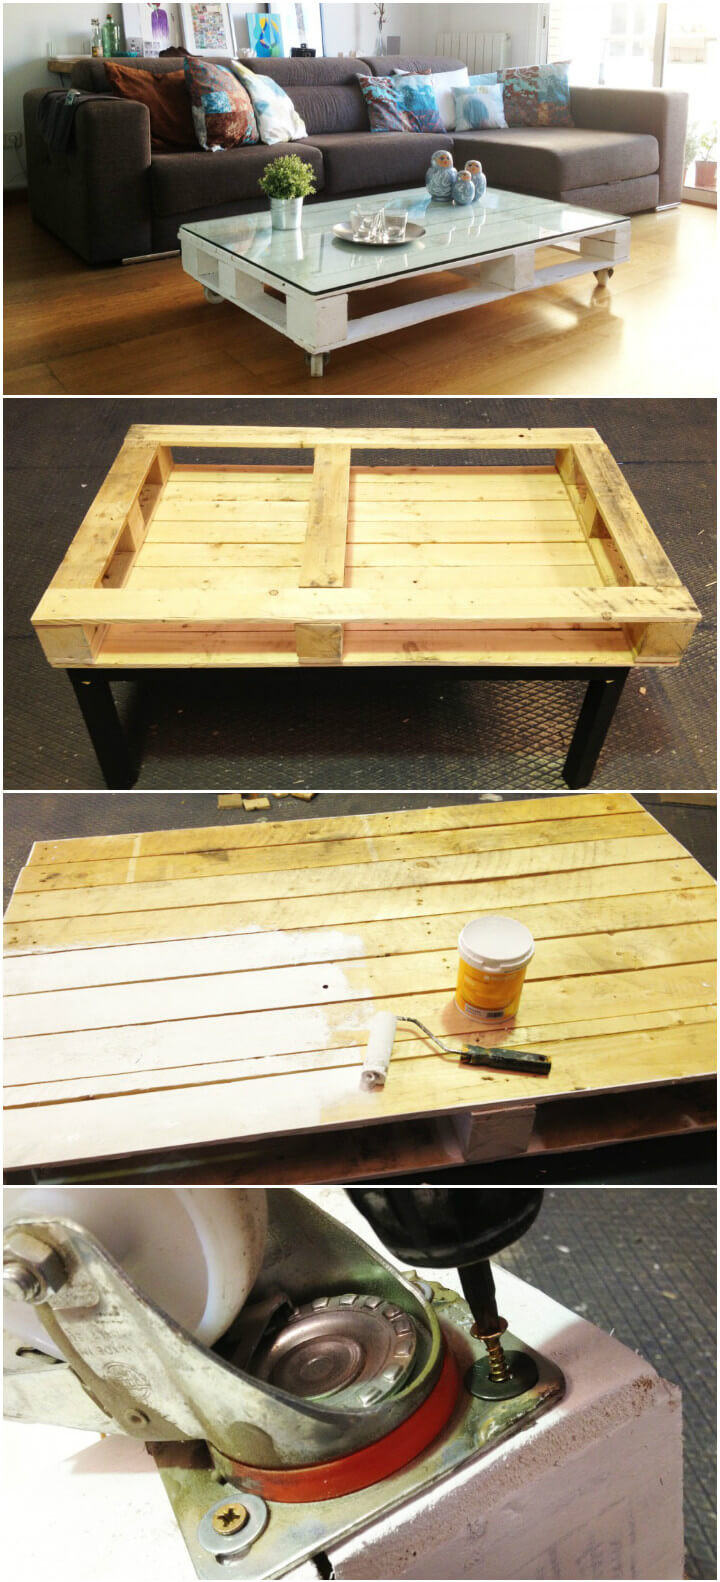 DIY Pallet Coffee Table Plans
 20 Easy & Free Plans to Build a DIY Coffee Table DIY Crafts